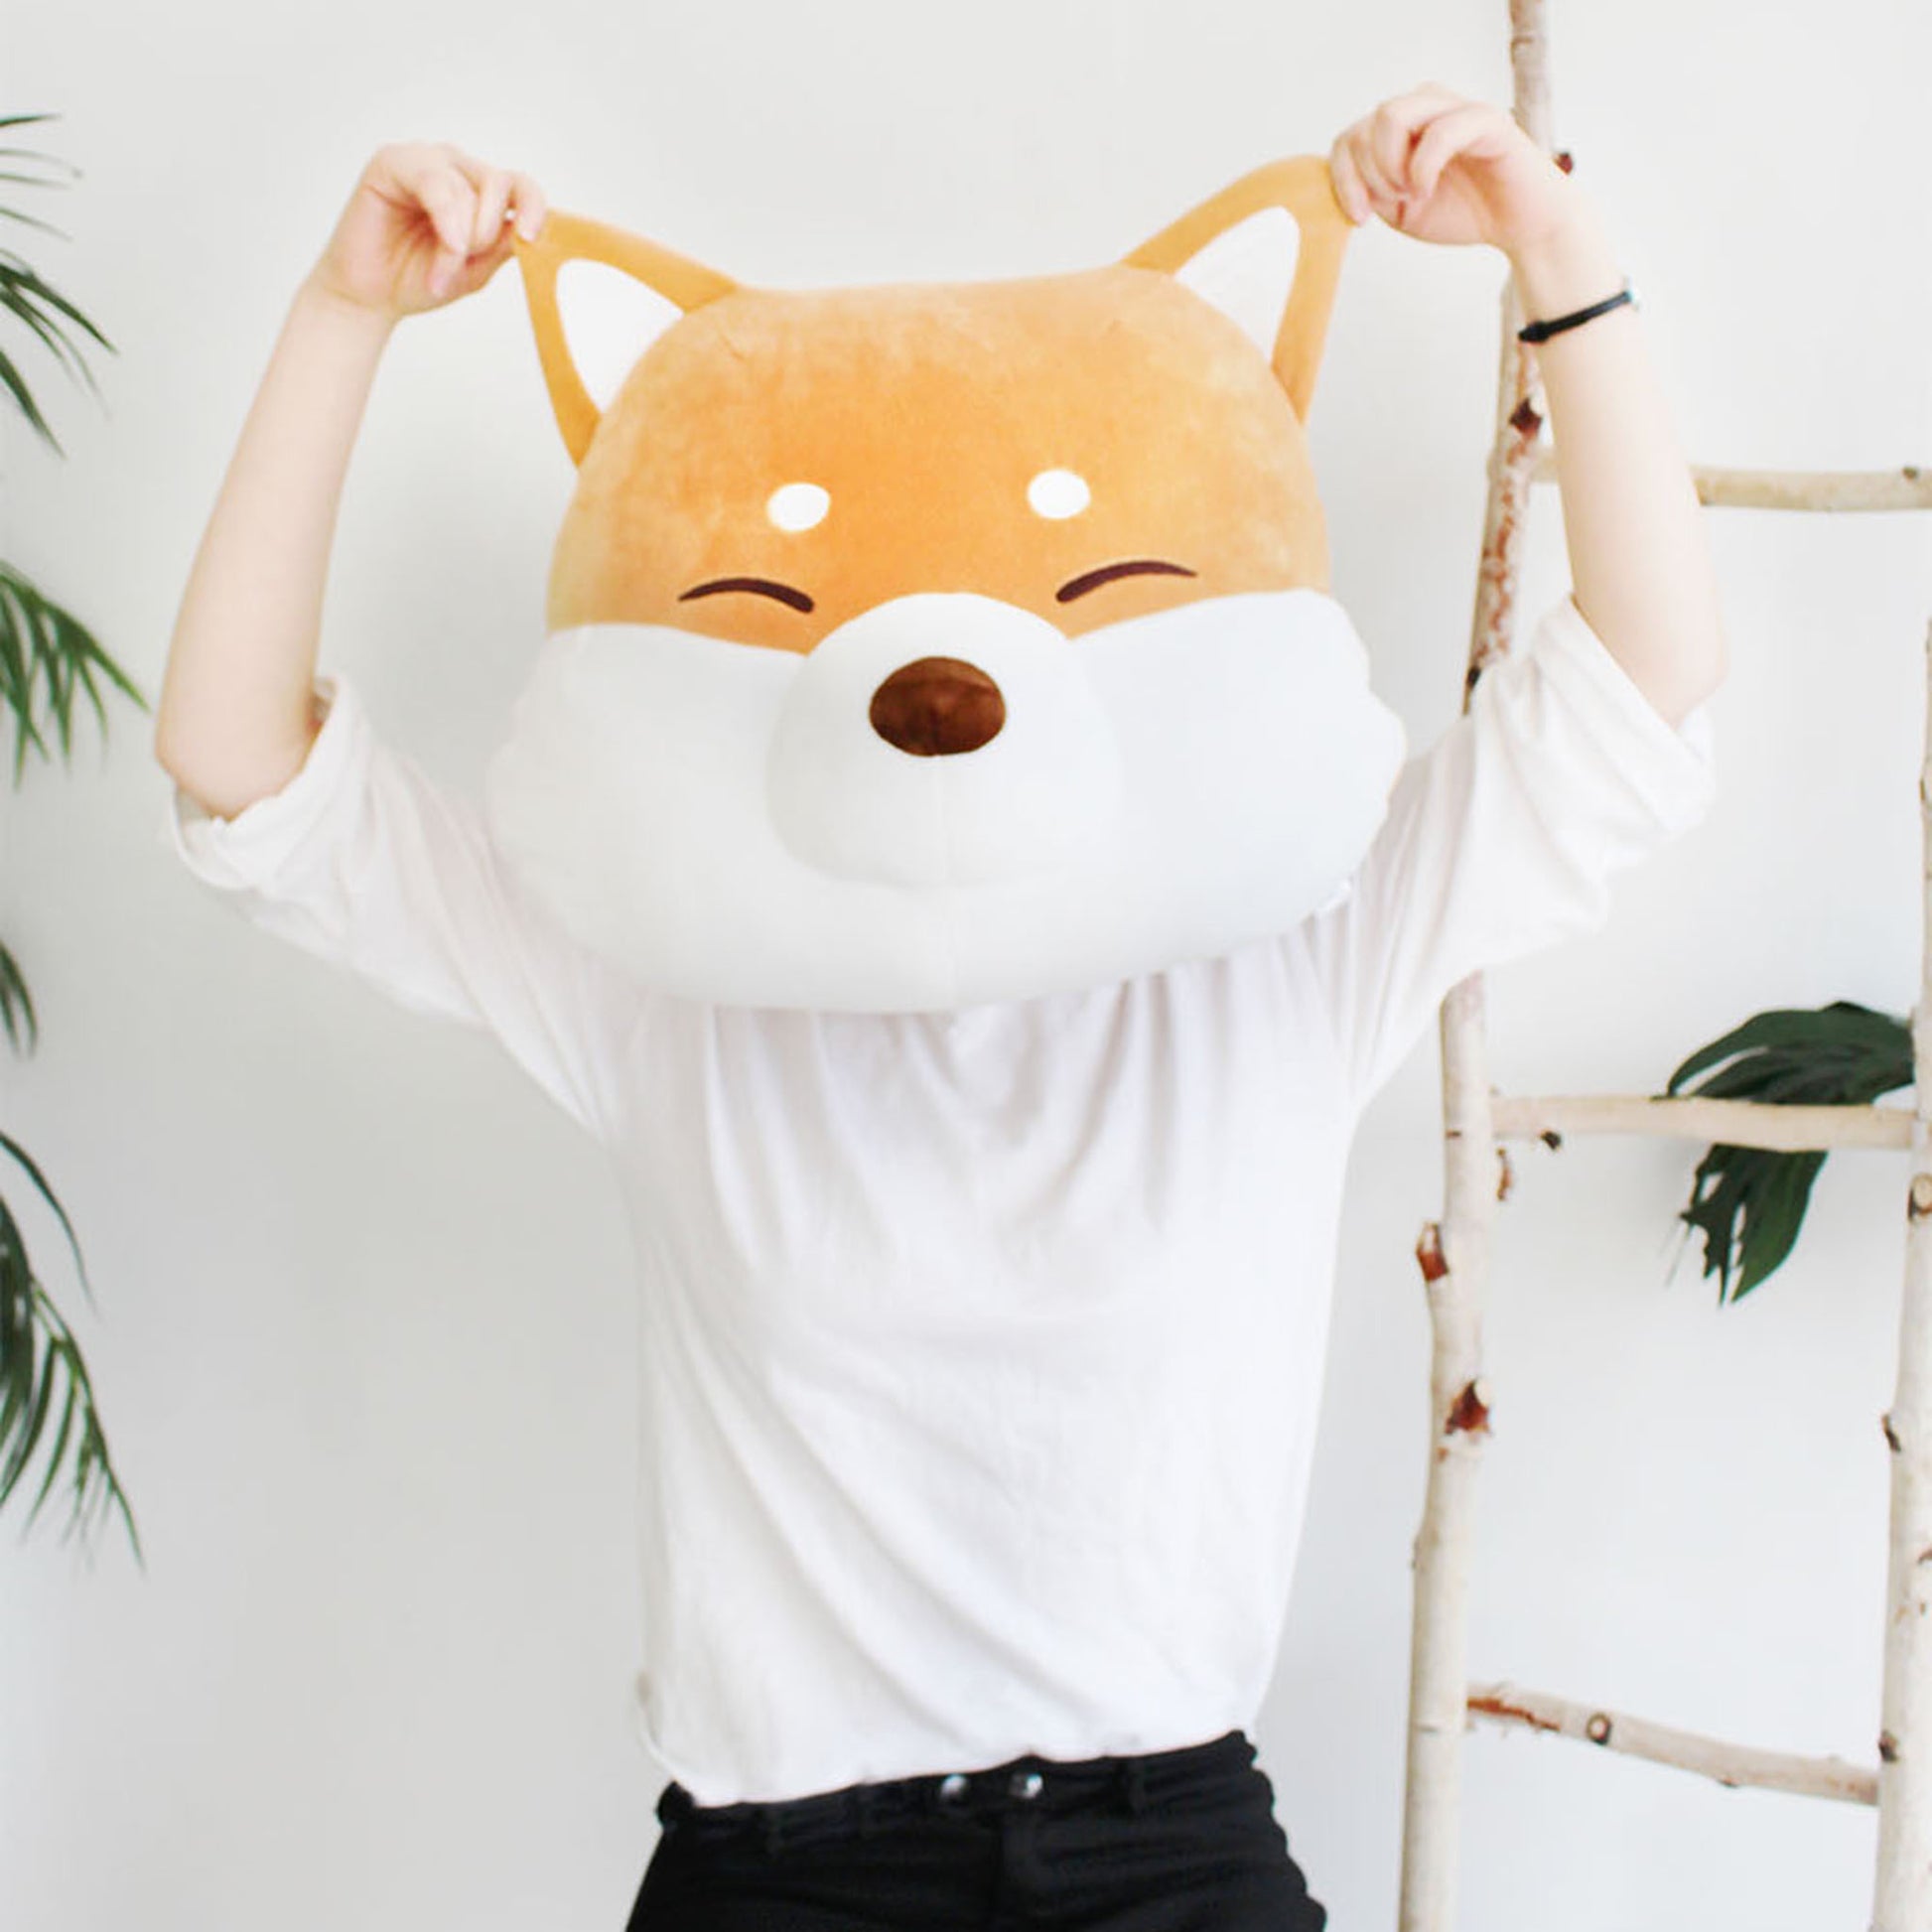 Model is holding the shiba face cushion by its ears in front of their face beside a birch ladder.